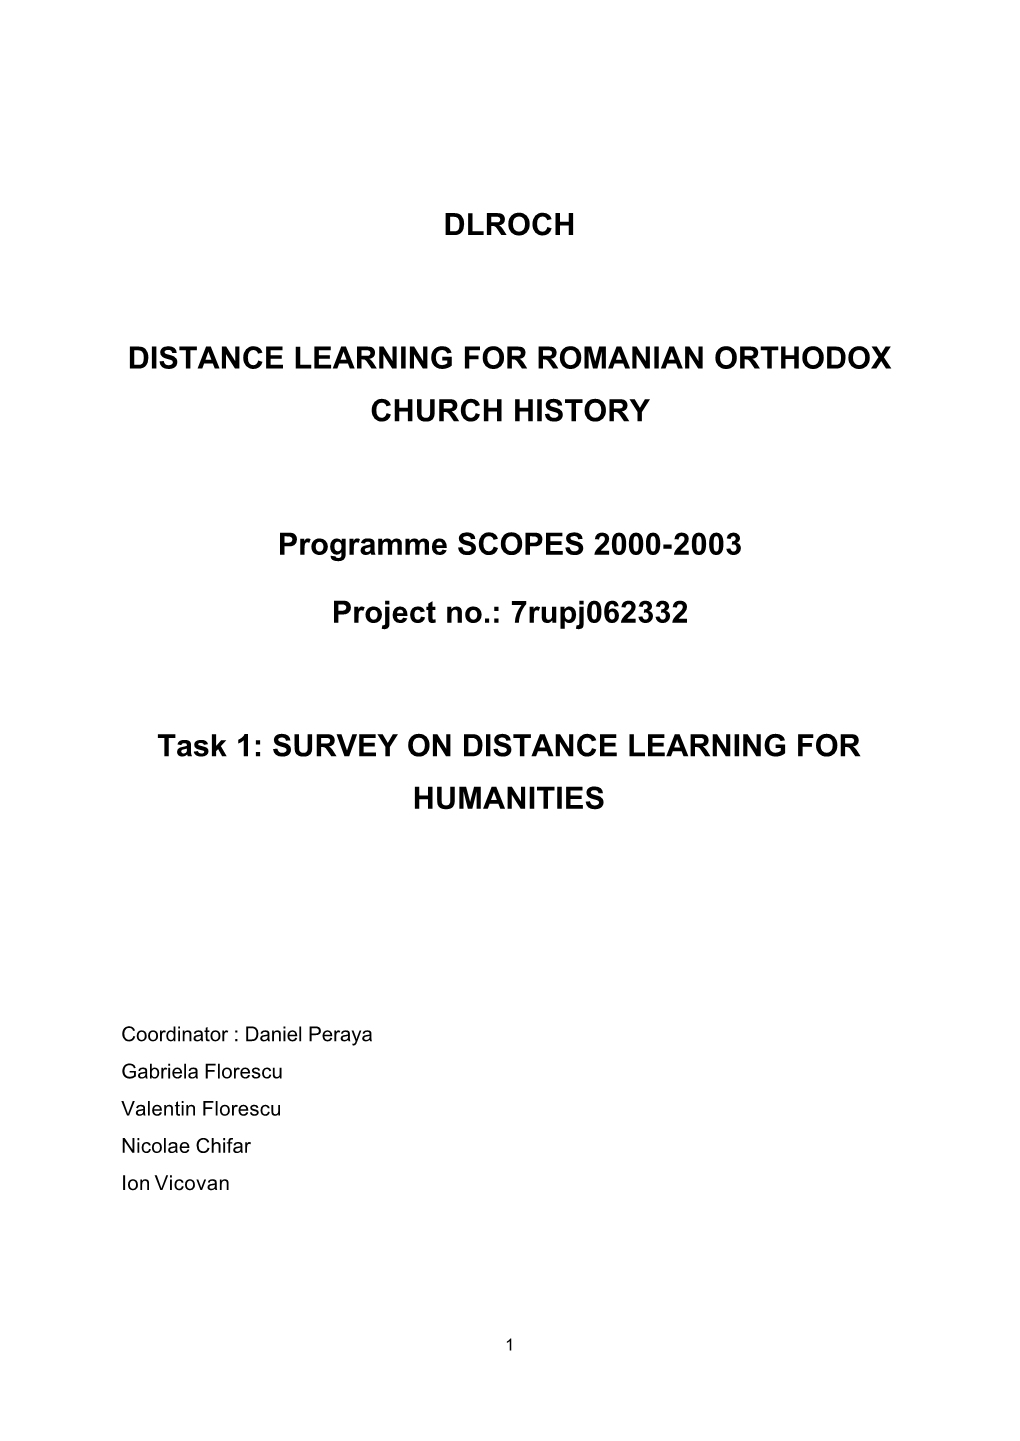 DLROCH Distance Learning for Romanian Orthodox Church History Project 32